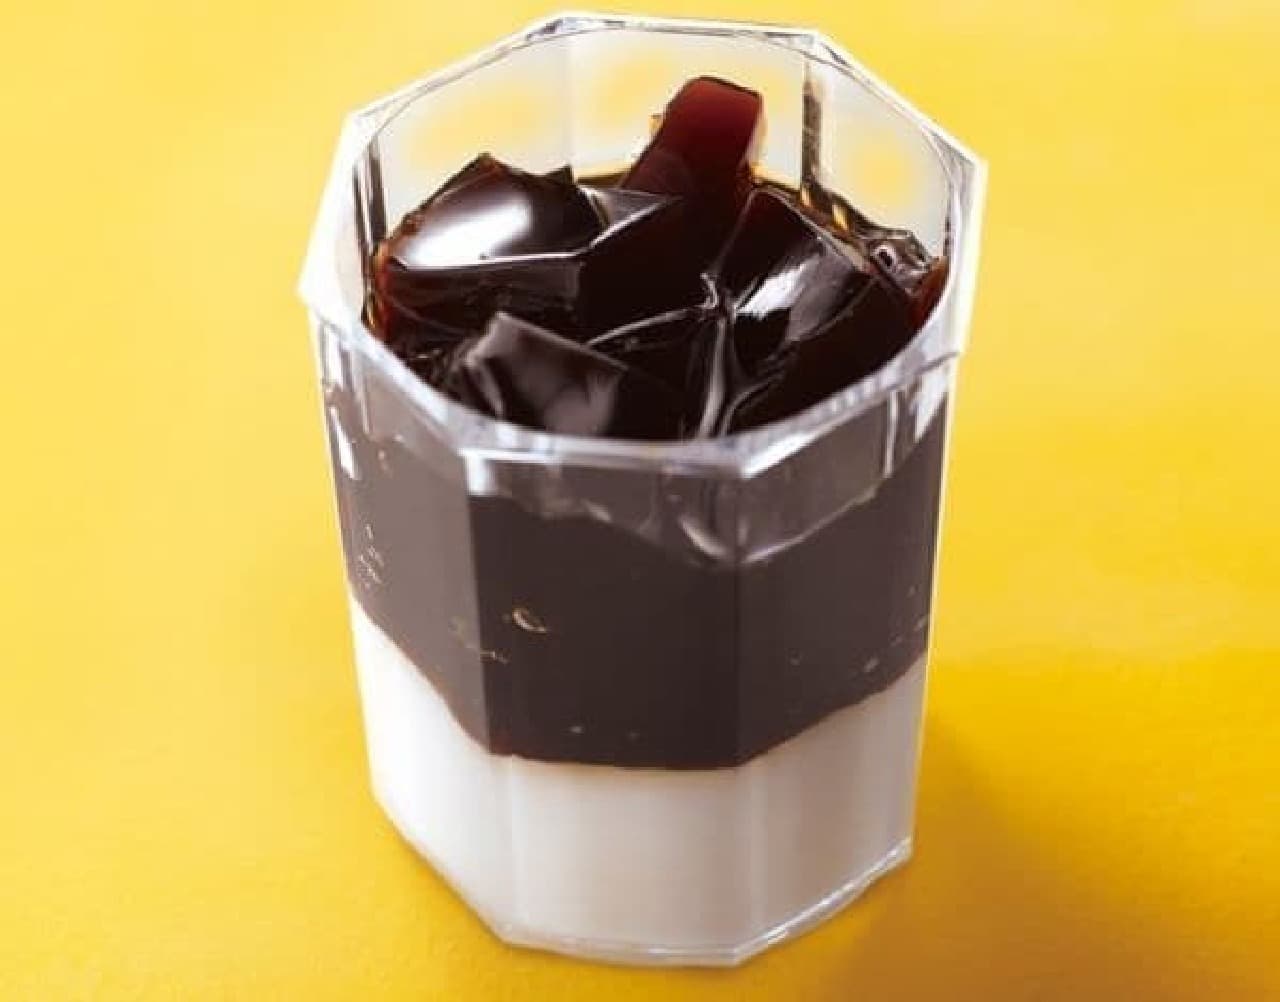 Homemade coffee jelly & blancmange is a dish of espresso coffee jelly topped on blancmange